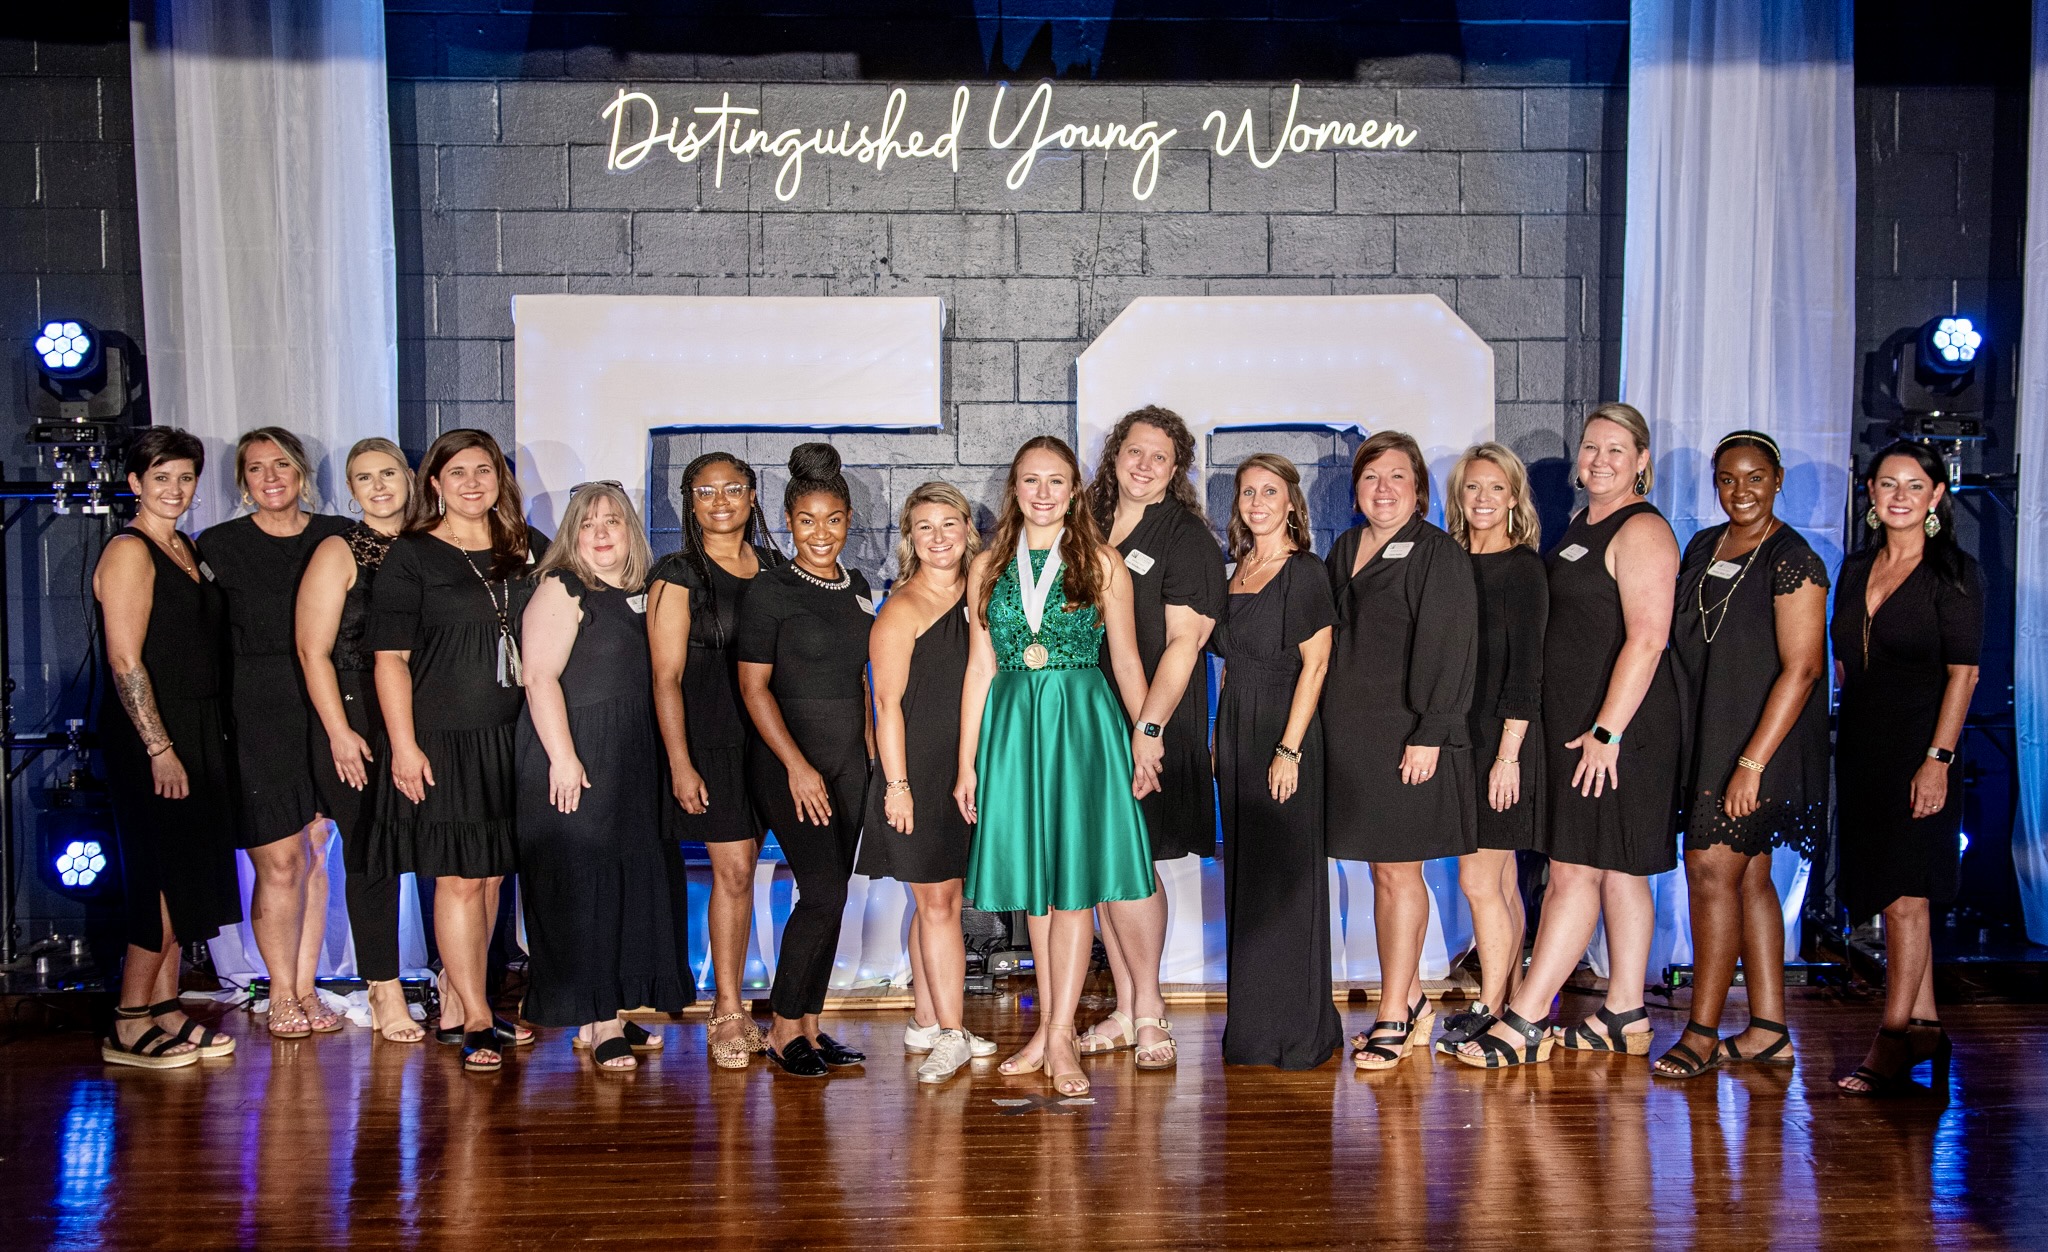 Women stand together on a stage under the banner that reads &quot;Distinguished Young Women&quot;